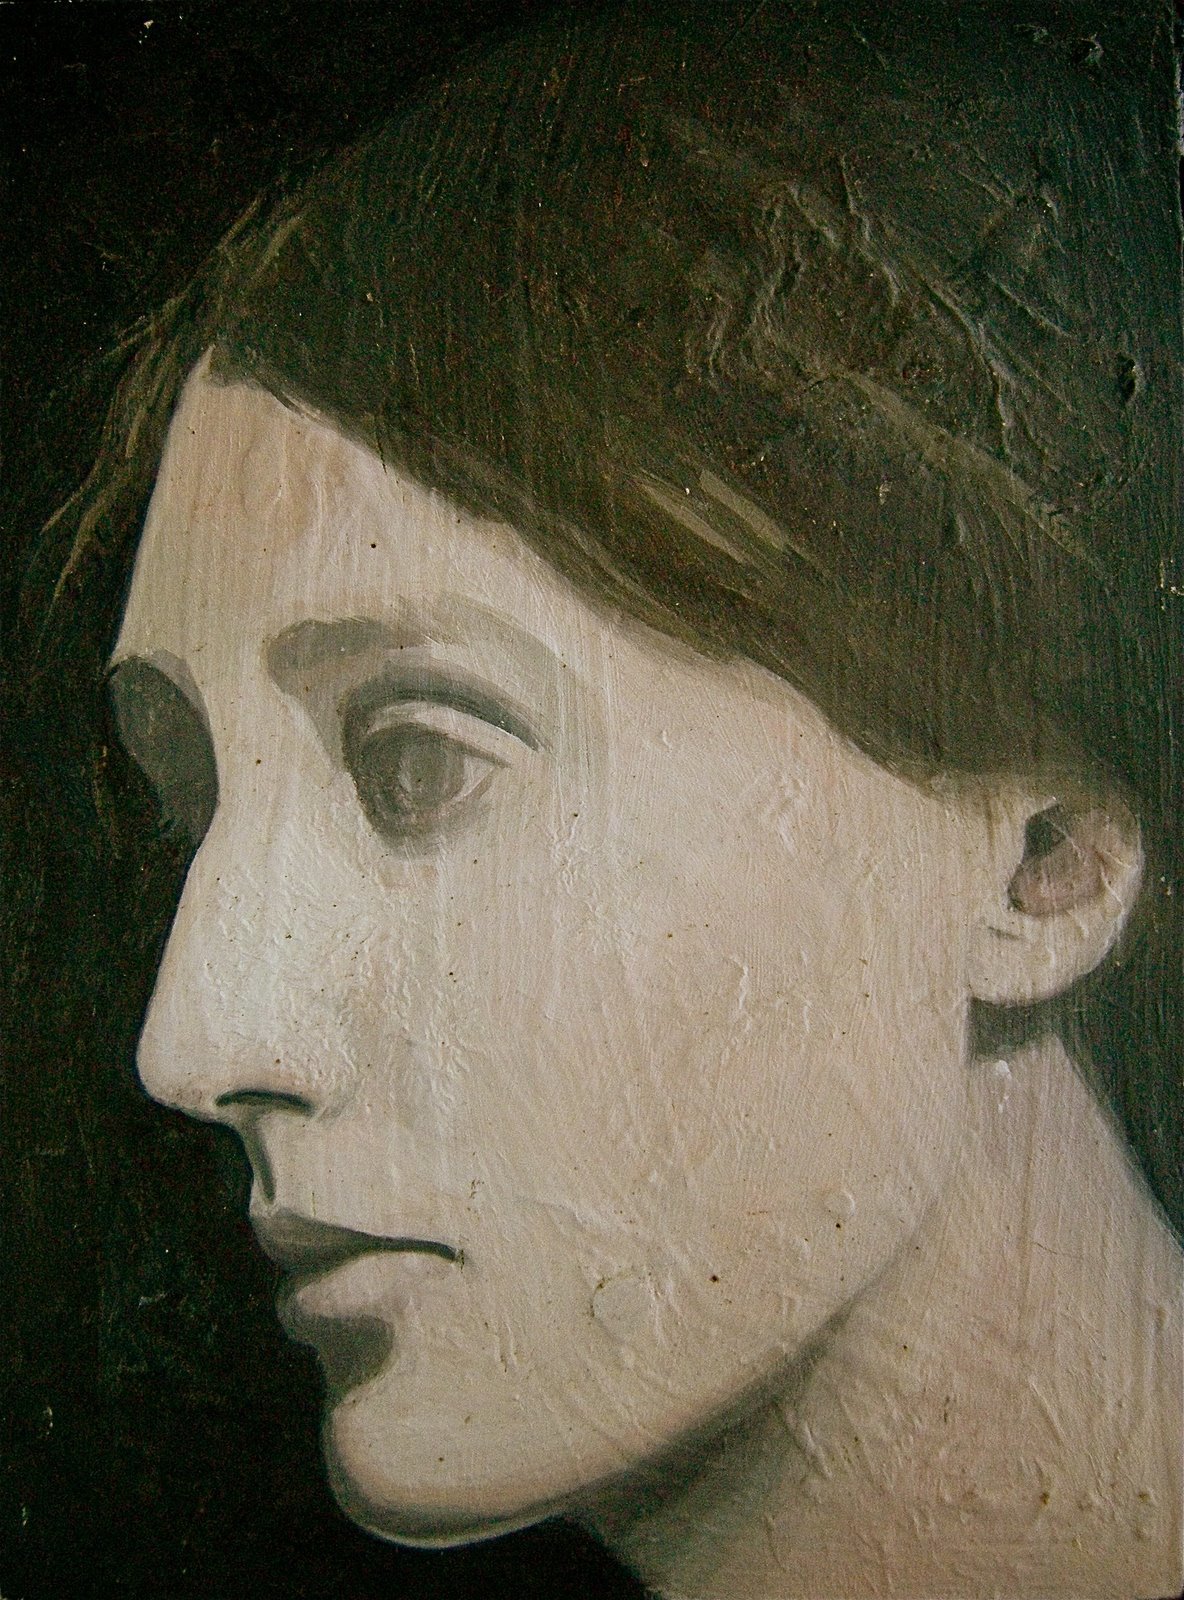   Virginia Woolf   oil on panel  10 x 6 inches, 2004 